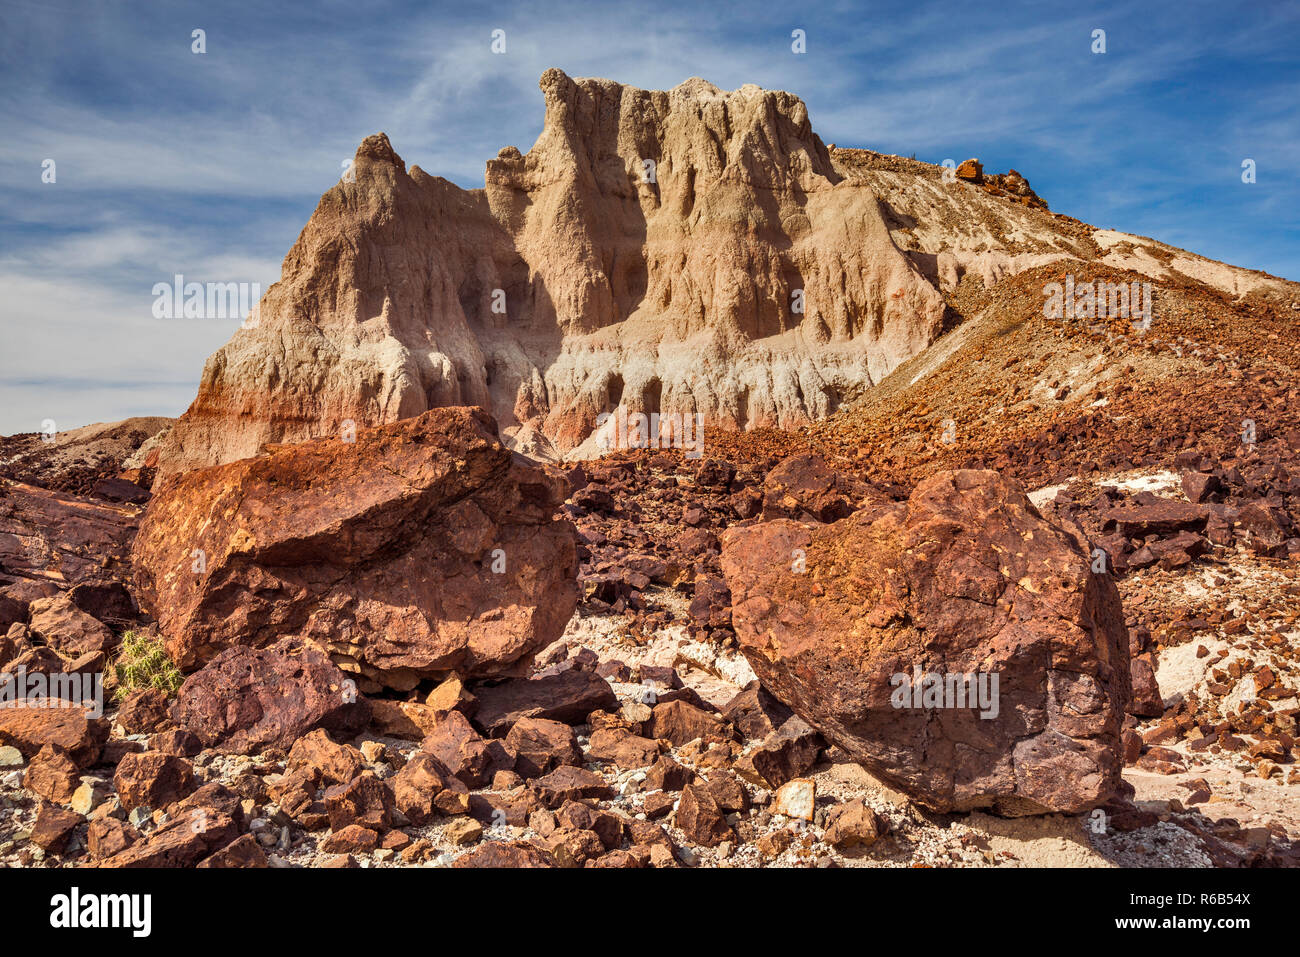 Volcanic formations and rocks in Cerro Castellan area, Ross Maxwell Scenic Drive, Chihuahuan Desert, Big Bend National Park, Texas, USA Stock Photo